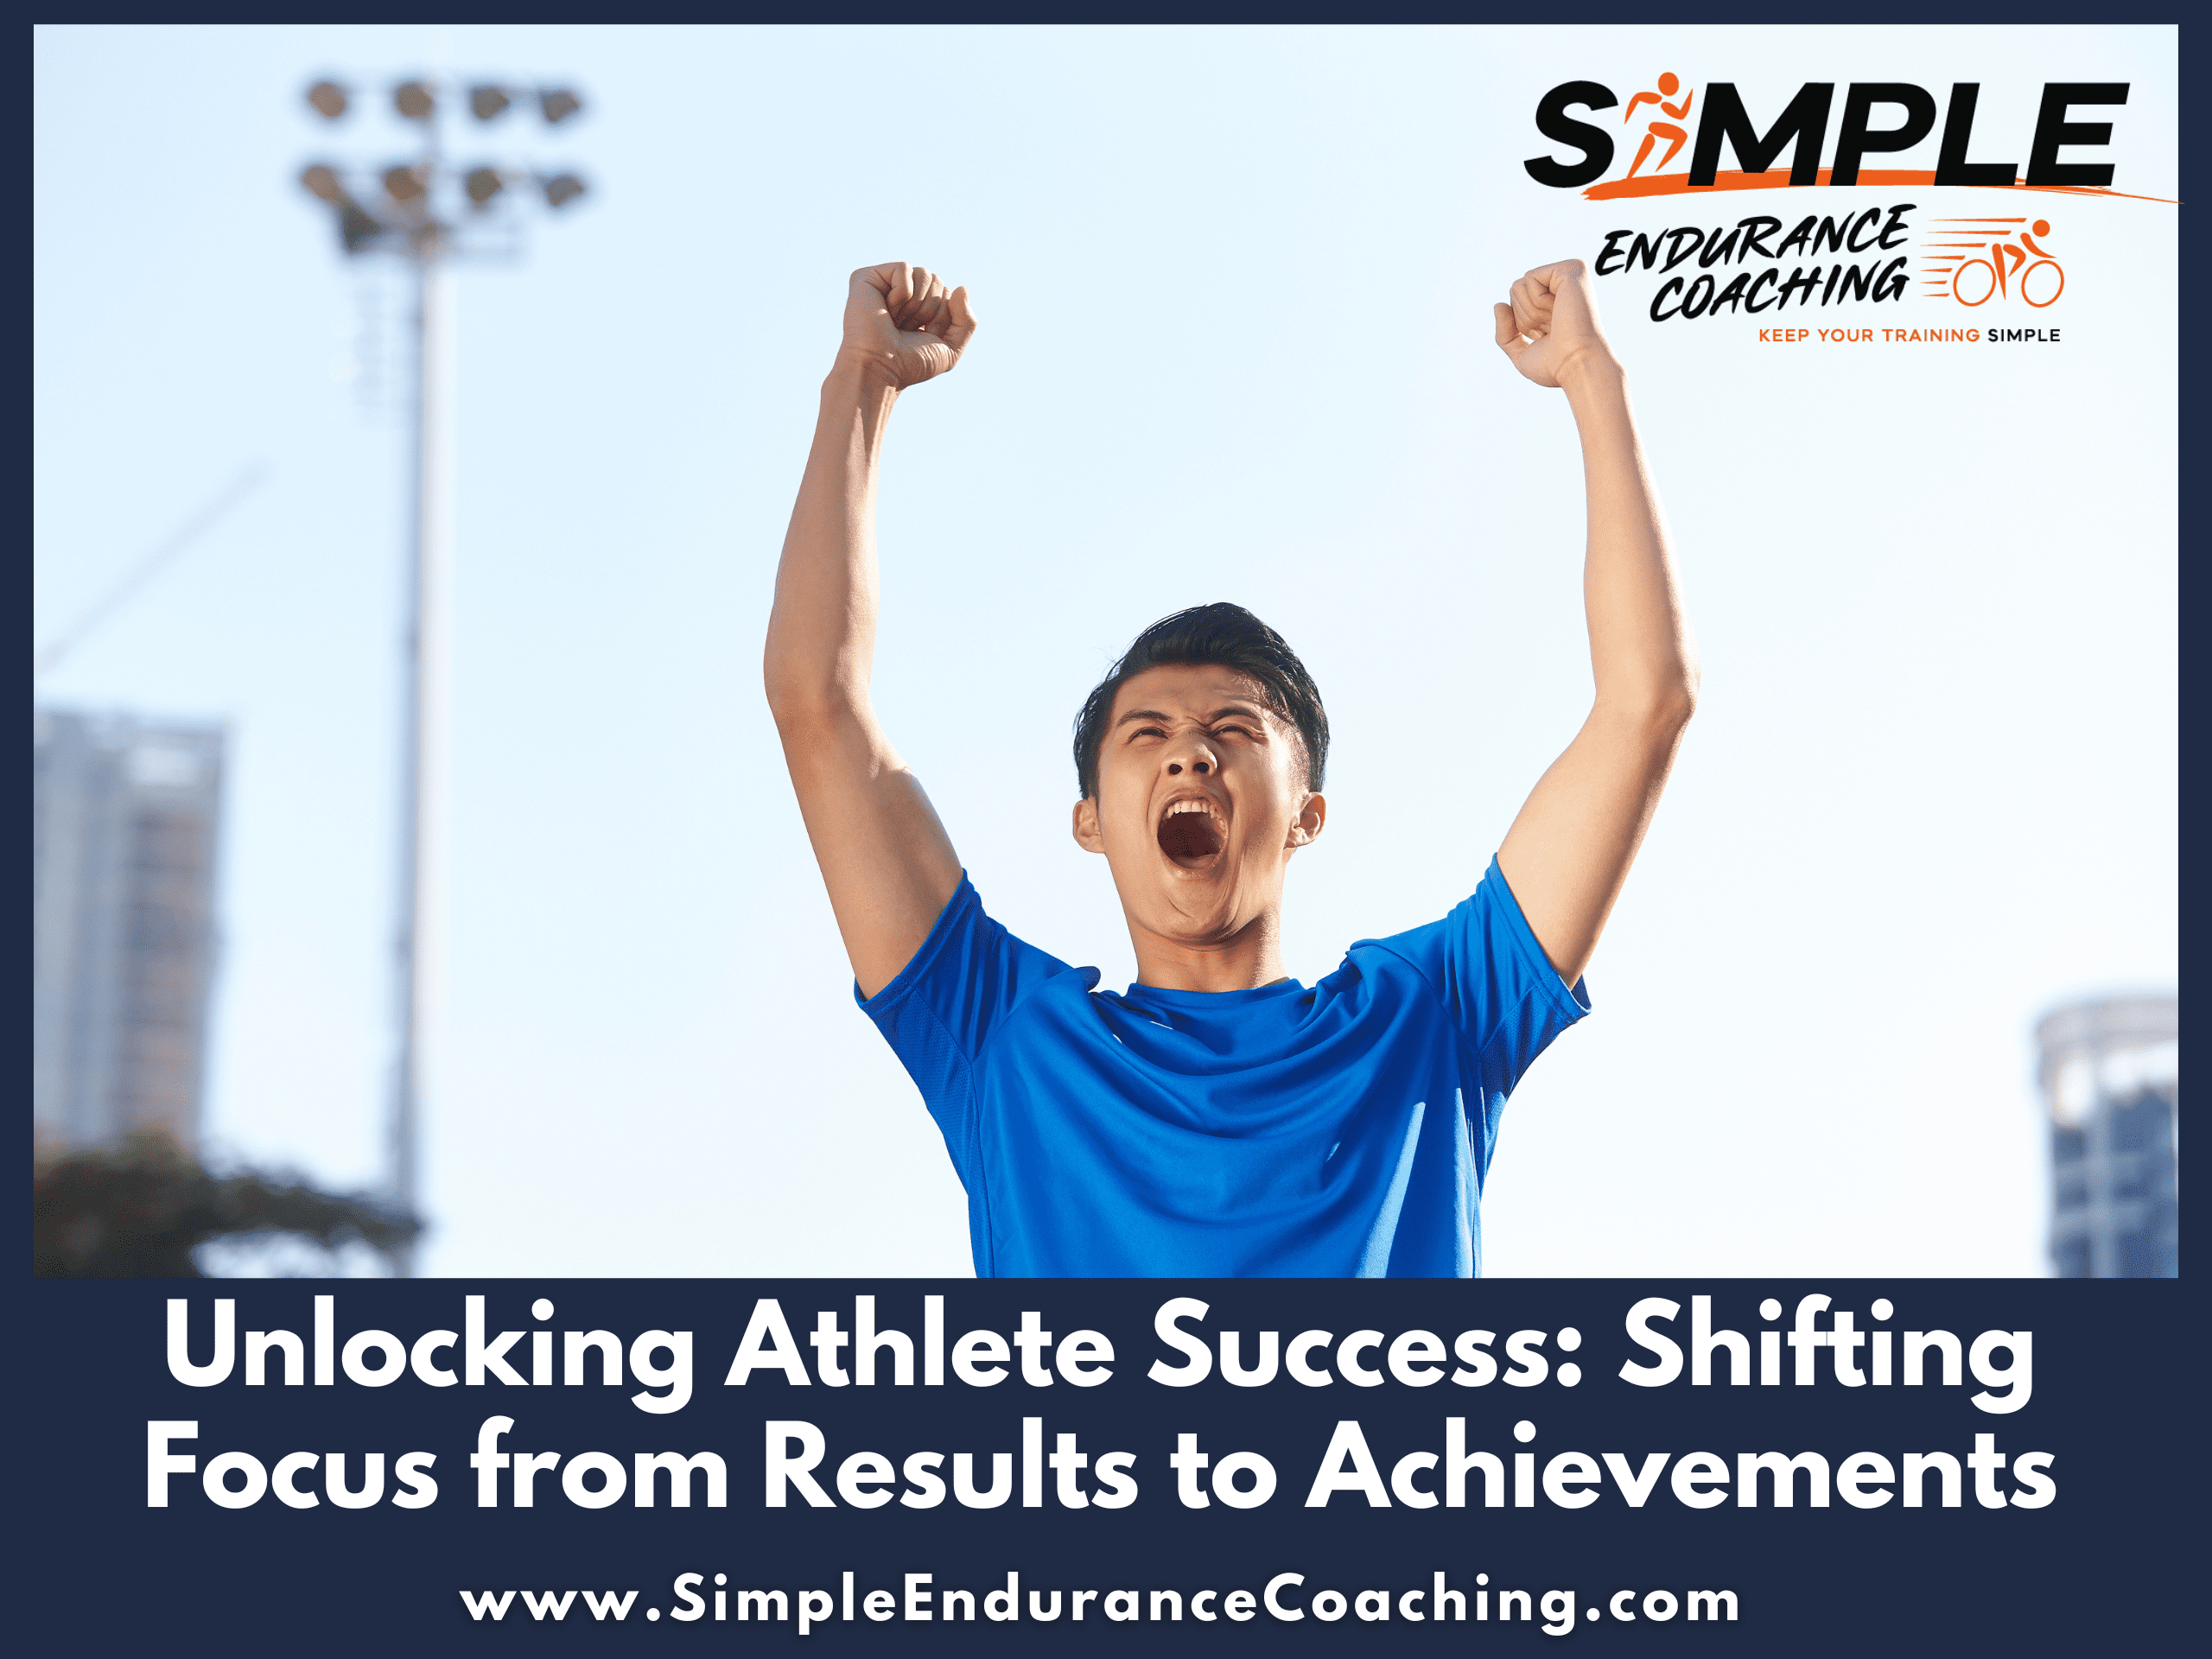 Unlock athlete success in endurance sports coaching by shifting focus from results to achievements. Learn strategies for a growth mindset and continuous improvement